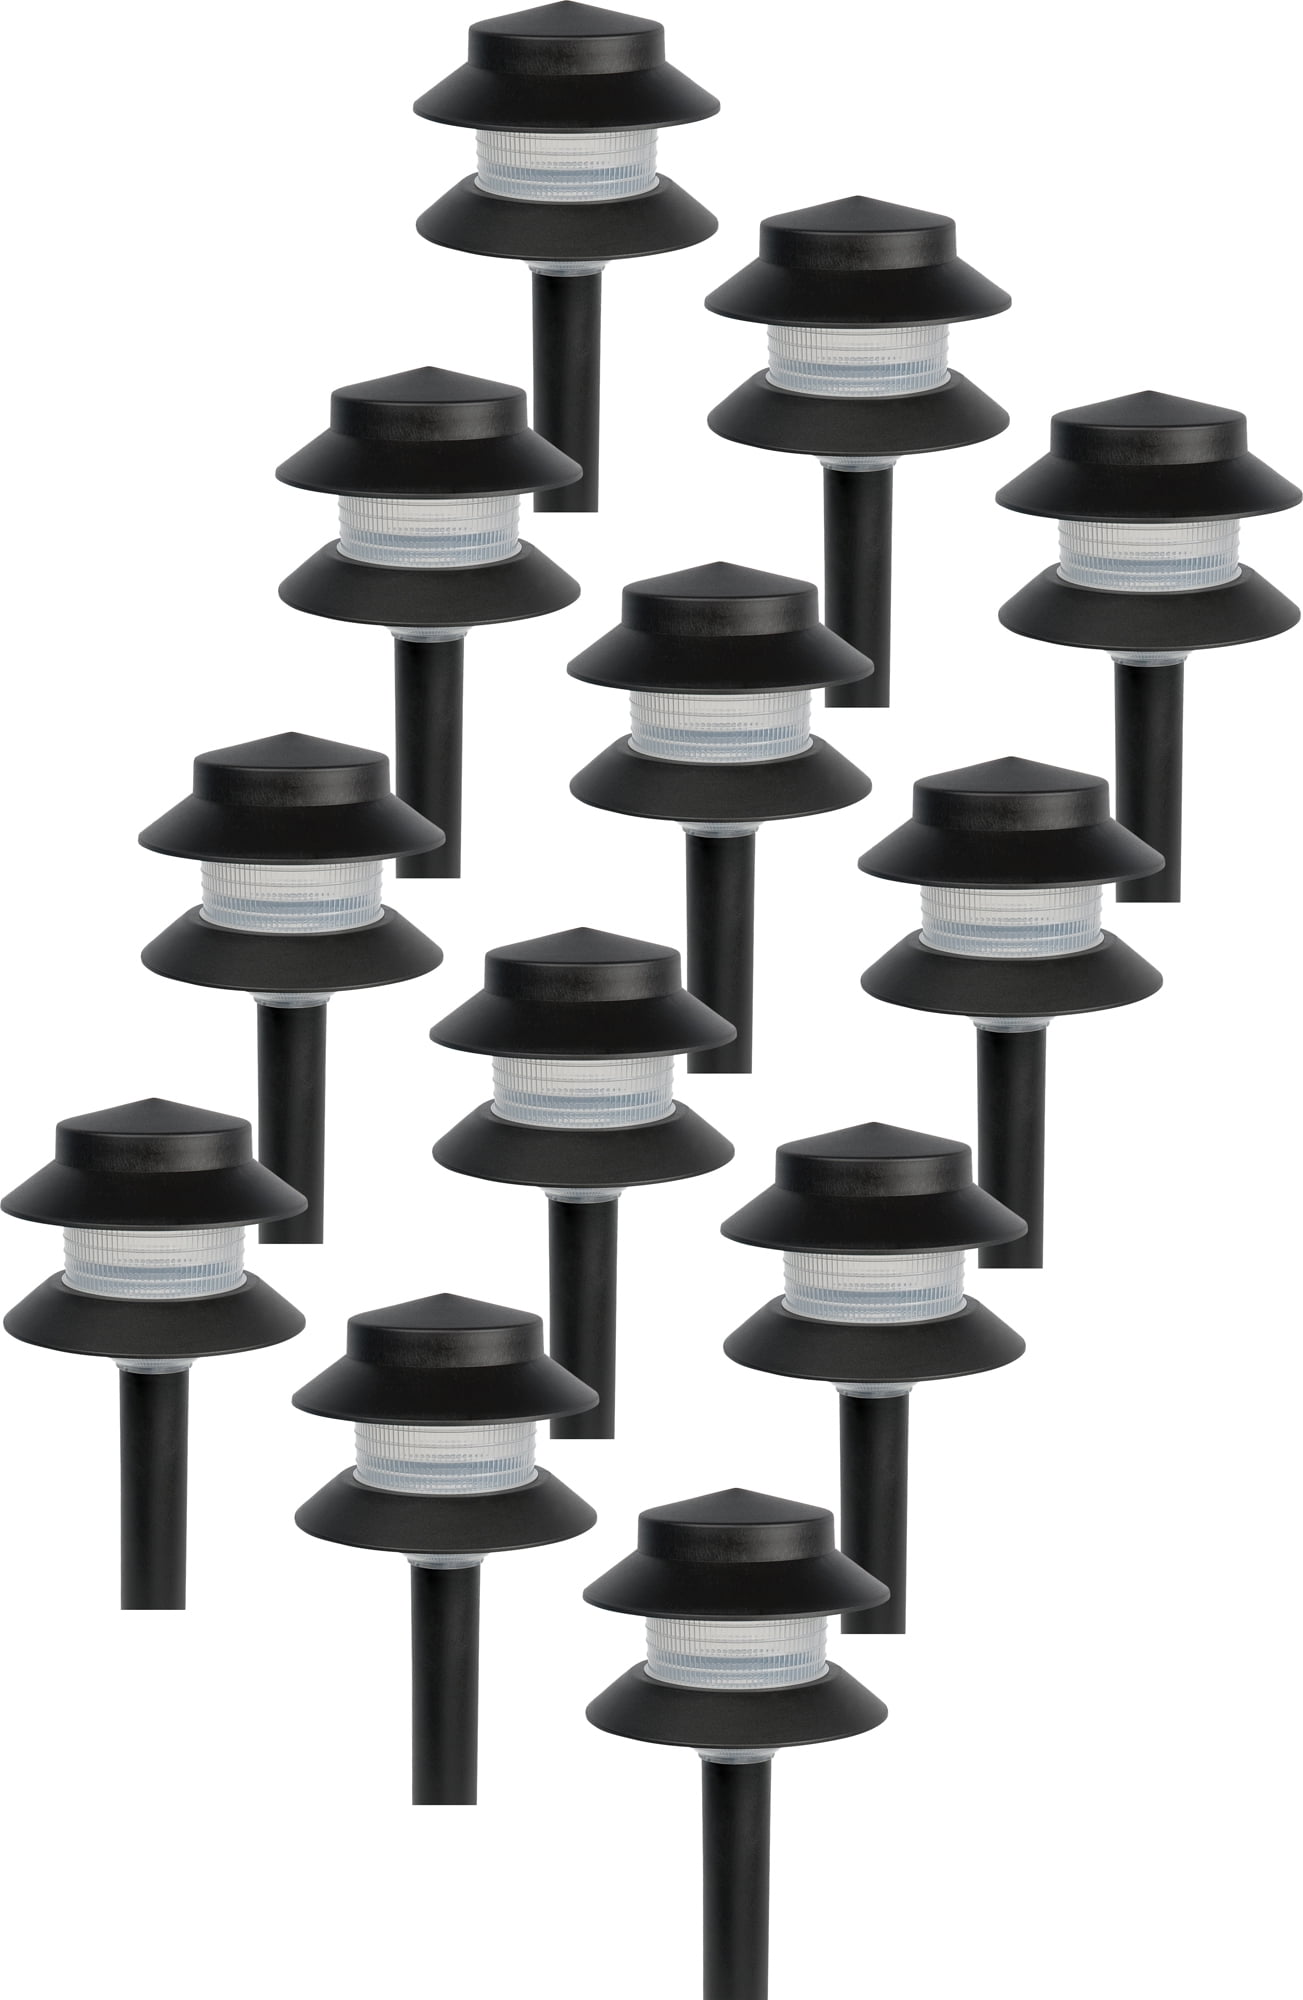 PARADISE NEW GL22627 Black Low Voltage Plastic 4W Outdoor Path Light (12 Pack)